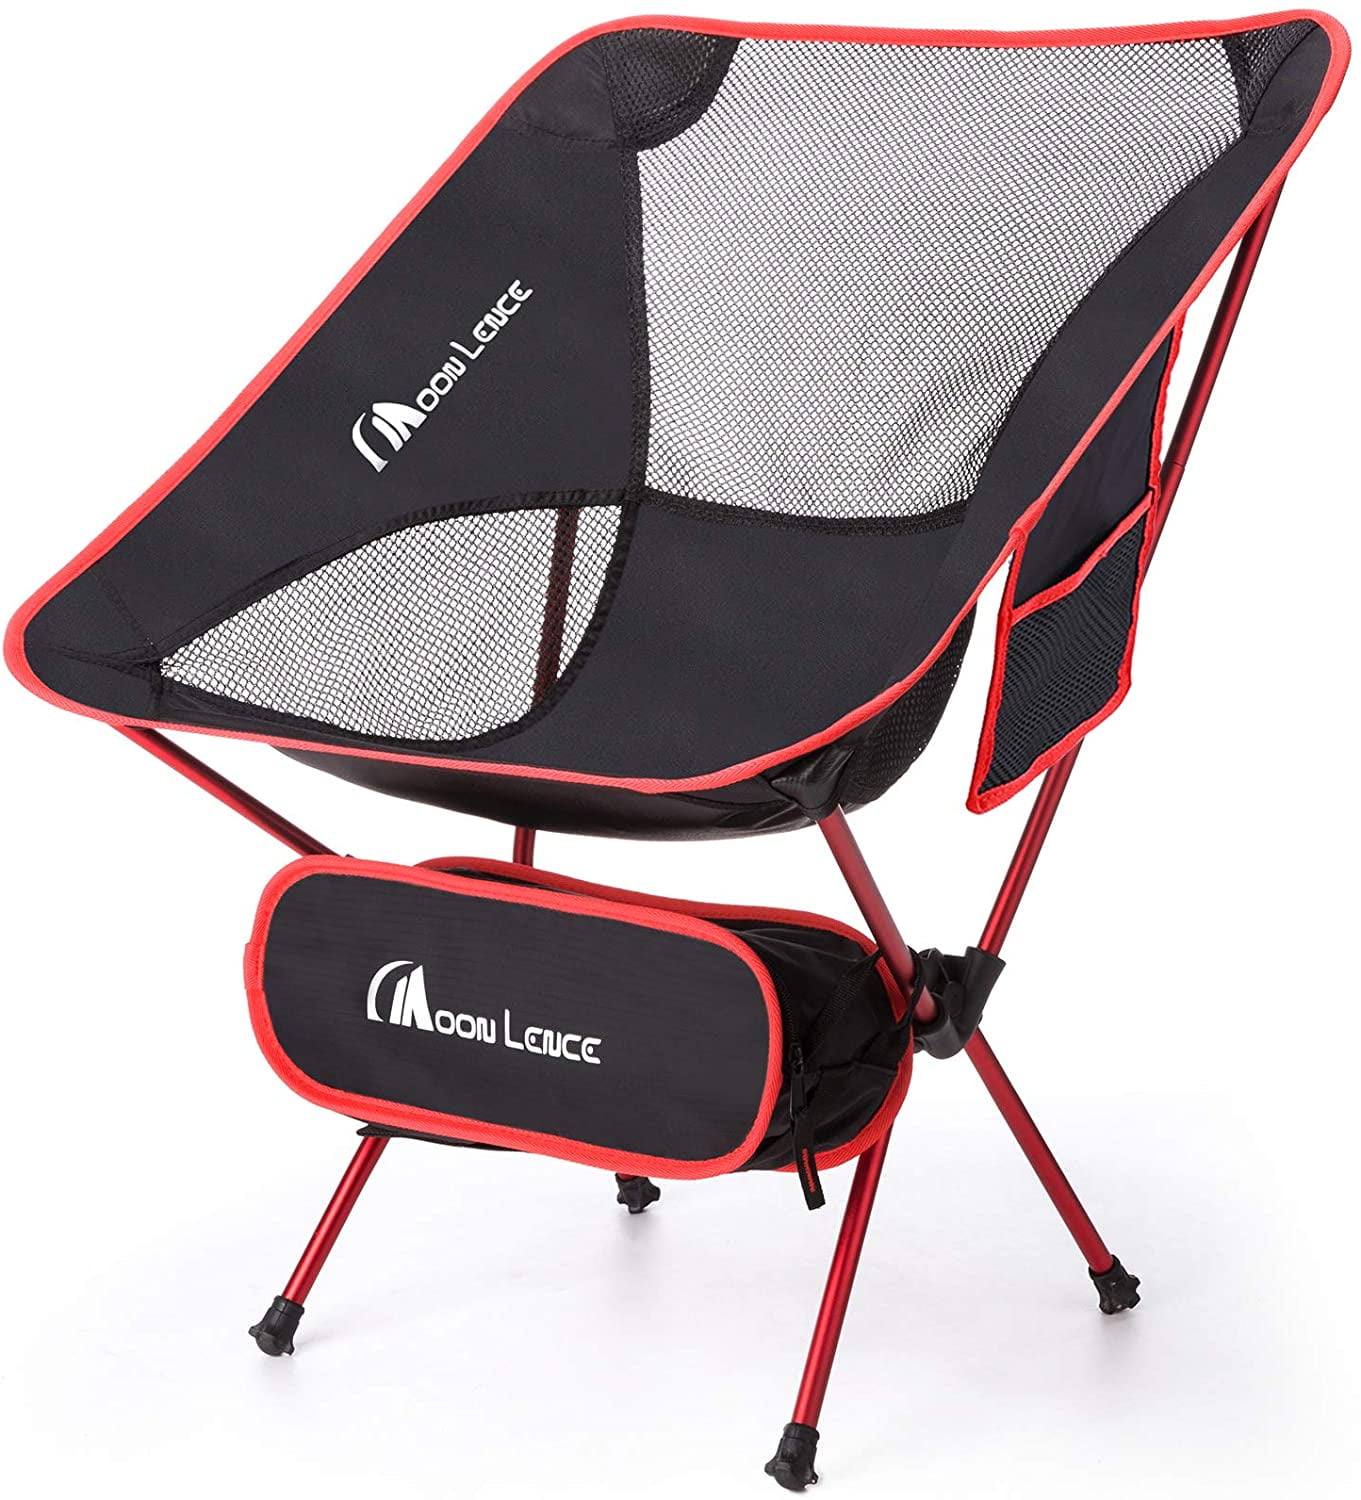 Outdoor Ultralight Portable Folding Chairs with Carry Bag Camping Beach Chair 